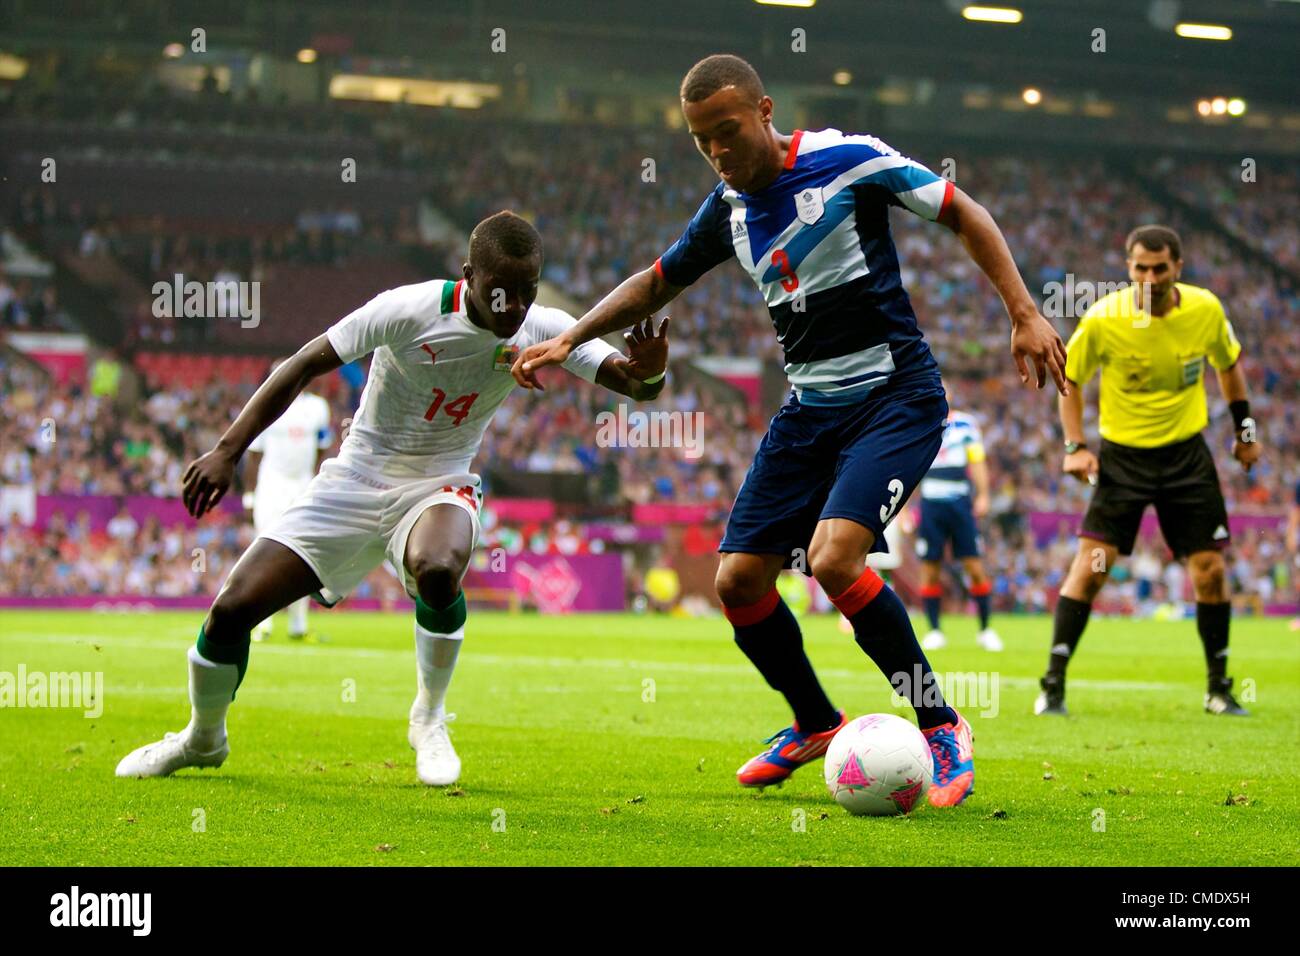 26.07.2012 Manchester, England. Team GB defender Ryan Bertrand and Senegal midfielder Idrissa Gueye in action during the first round group A mens match between Team GB and Senegal. Stock Photo